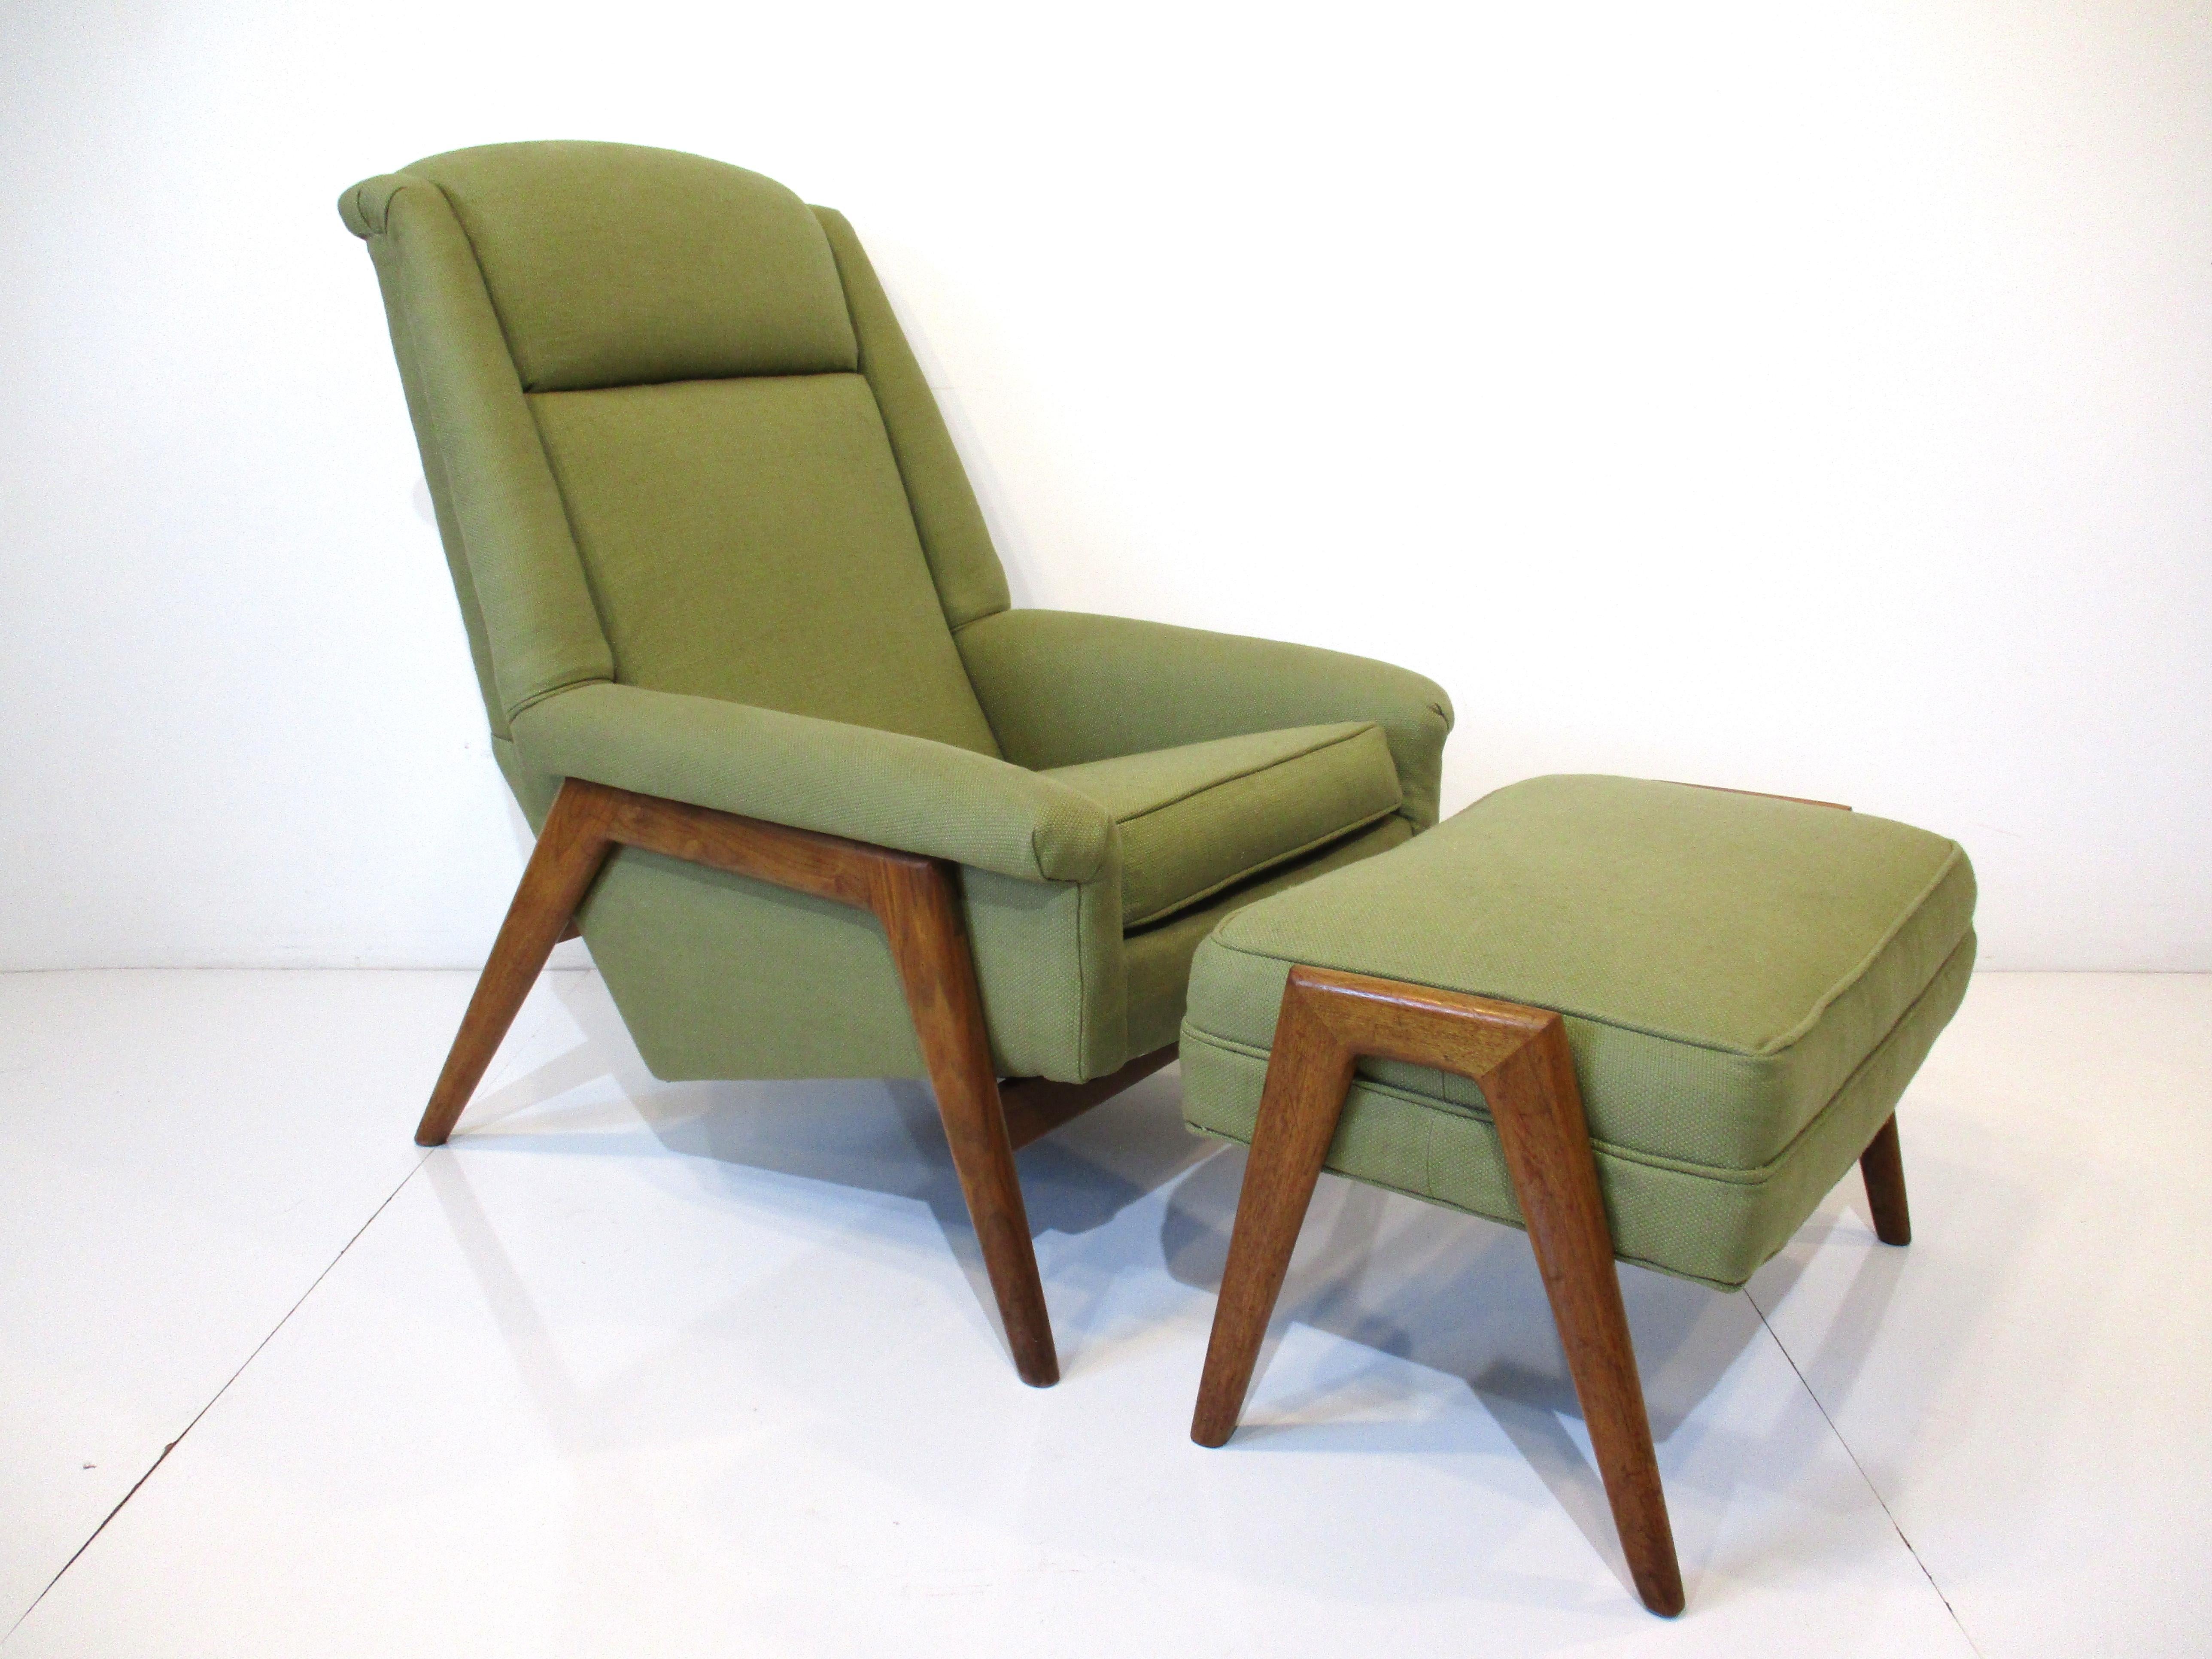 A very comfortable and well designed ergonomic styled upholstered lounge chair on a walnut frame with matching ottoman. Finished in a tight woven celery green contract fabric typical of the material used during the period, designed by Folke Ohlsson